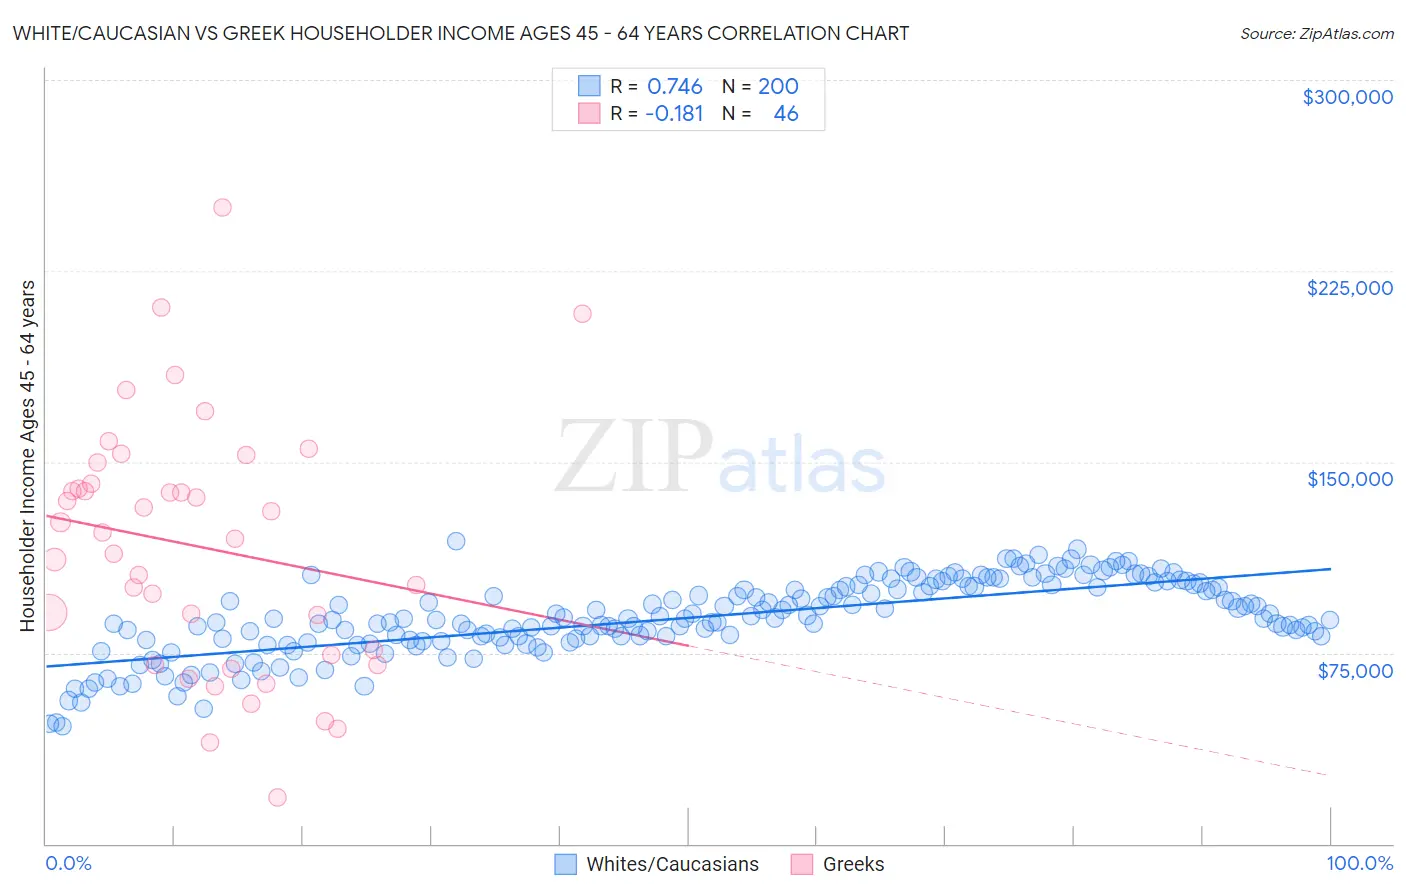 White/Caucasian vs Greek Householder Income Ages 45 - 64 years